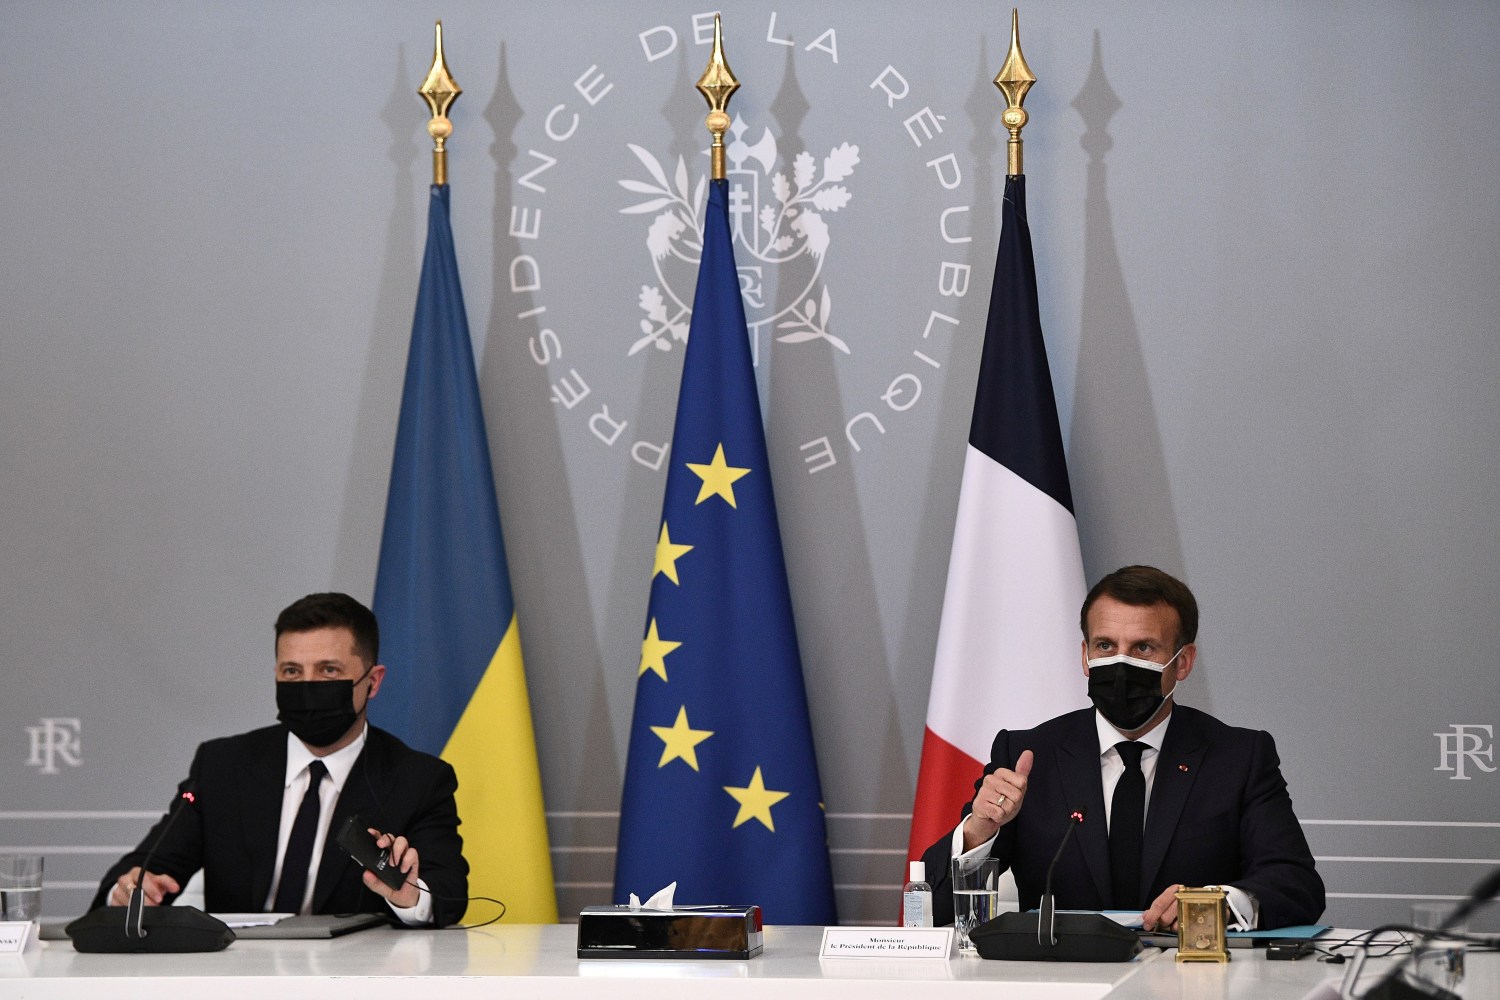 French President Emmanuel Macron and Ukrainian President Volodymyr Zelenskiy hold a news conference following their meeting at the Elysee Palace in Paris, France April 16, 2021. Anne-Christine Poujoulat/Pool via REUTERS